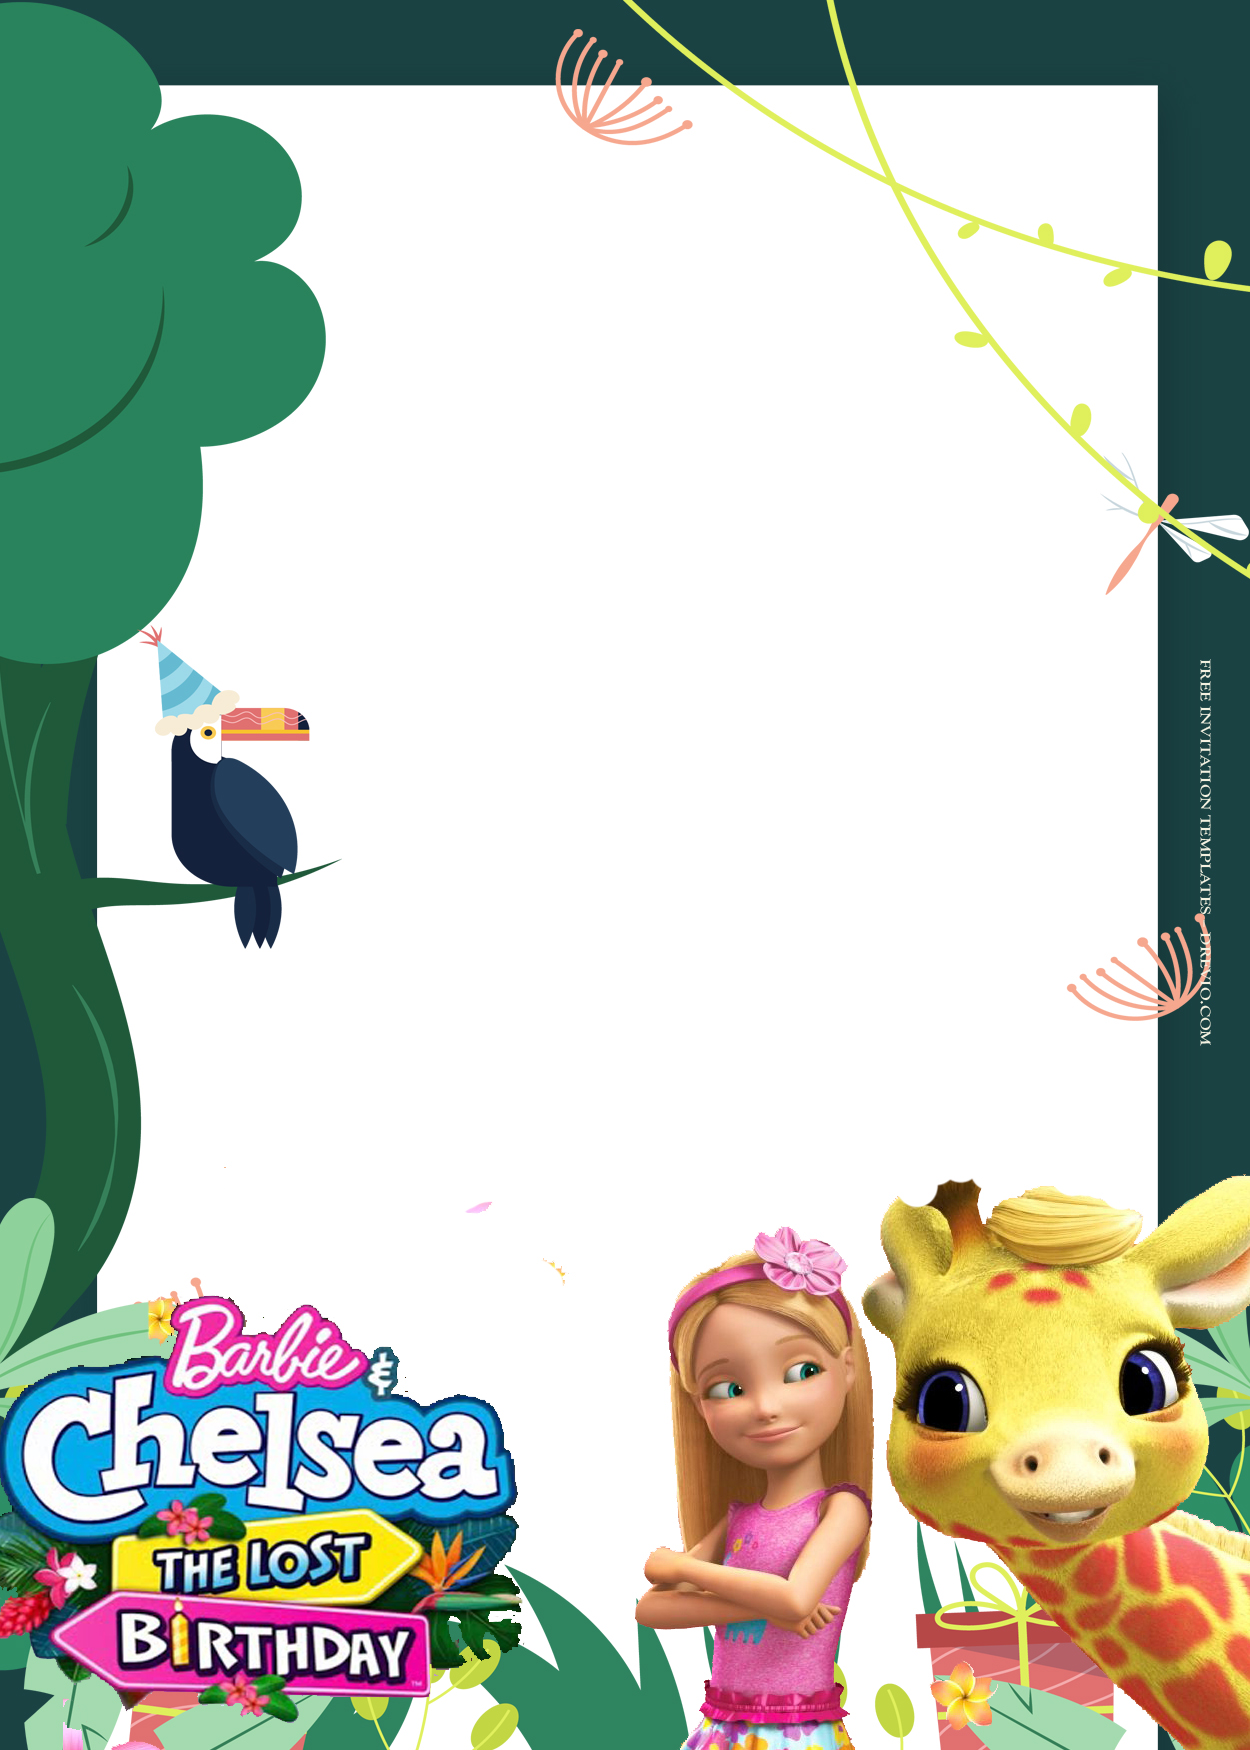 8+ Barbie And Chelsea The Lost Birthday Invitation Templates Two